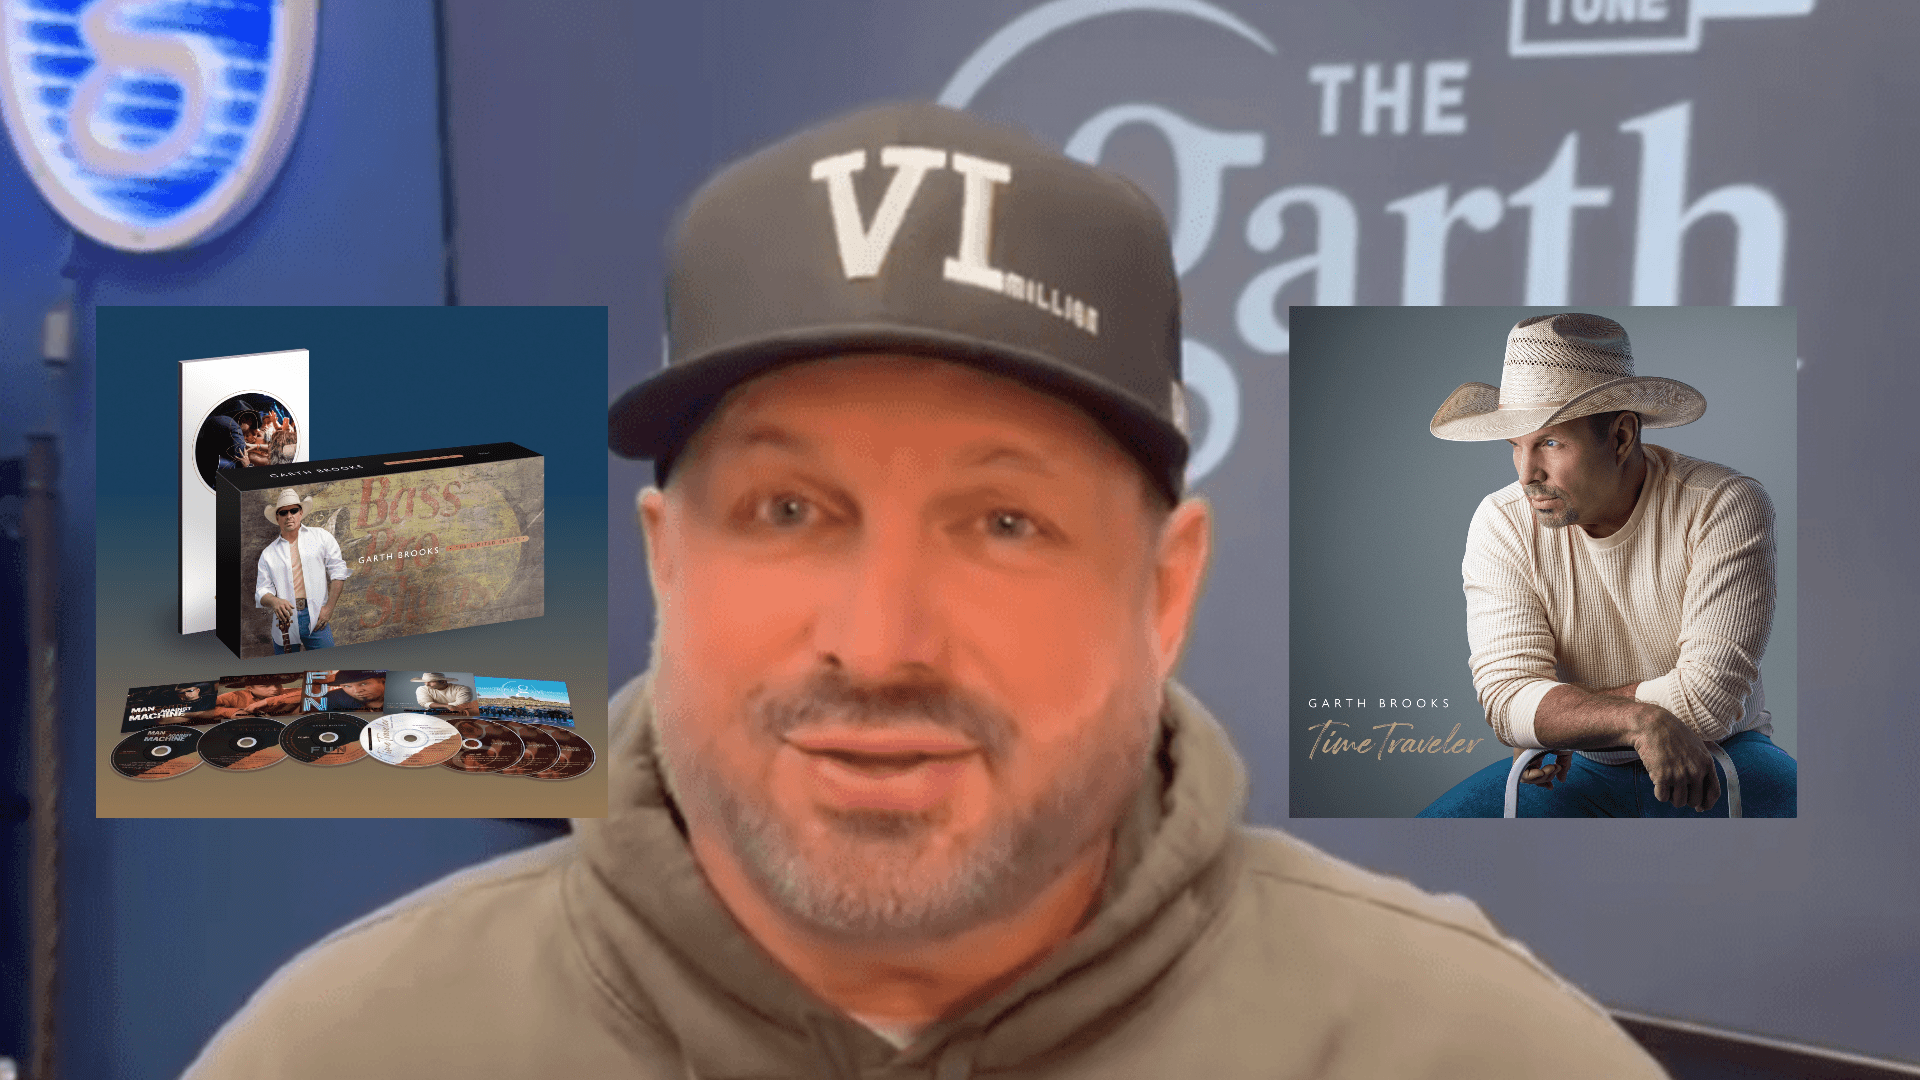 garthbrooks has announced his new album “Time Traveler” will be